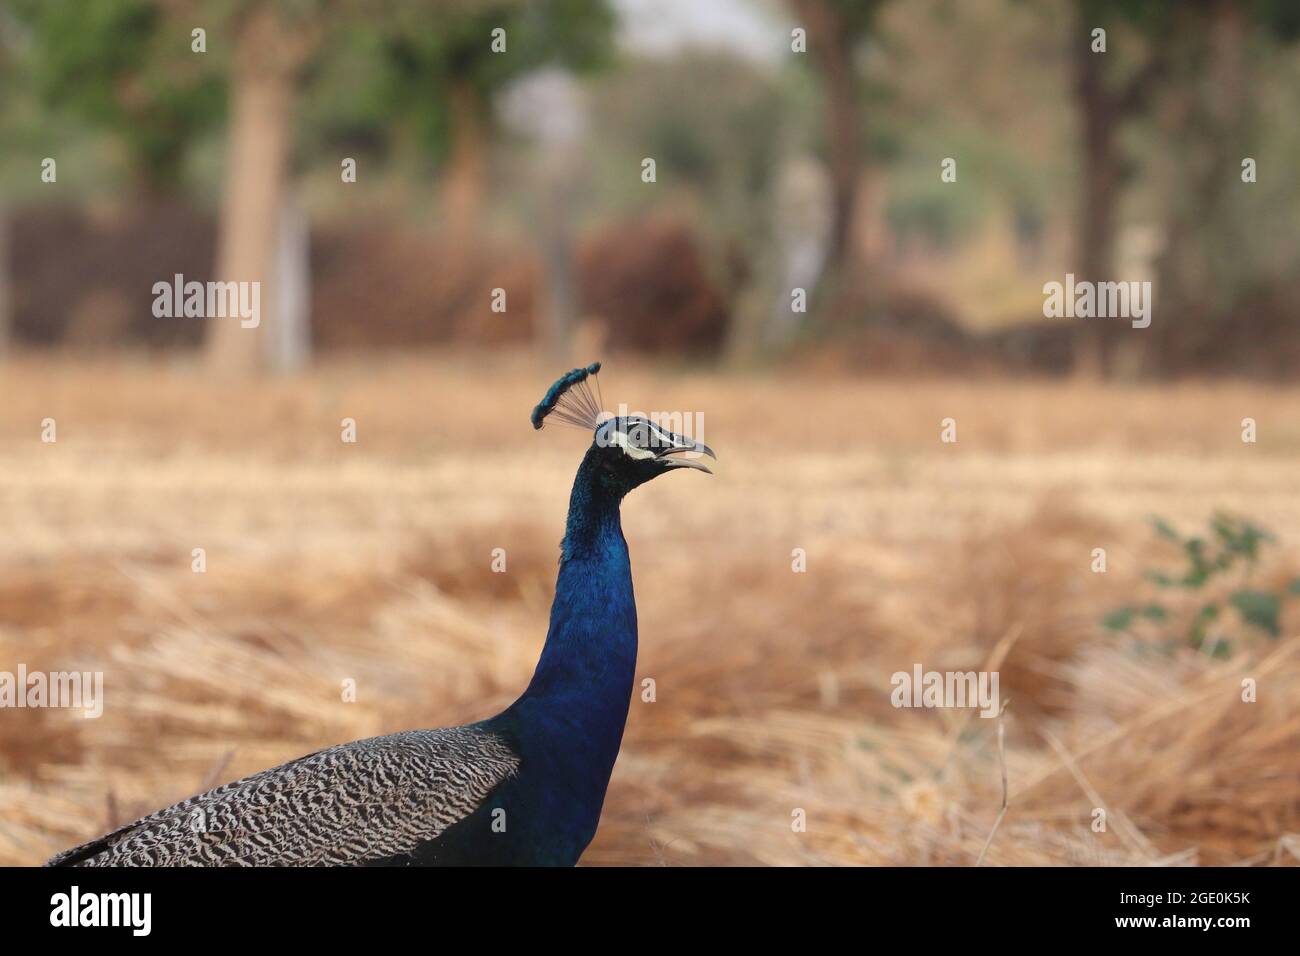 A closeup side view of a colorful peacock bird in the field Stock Photo